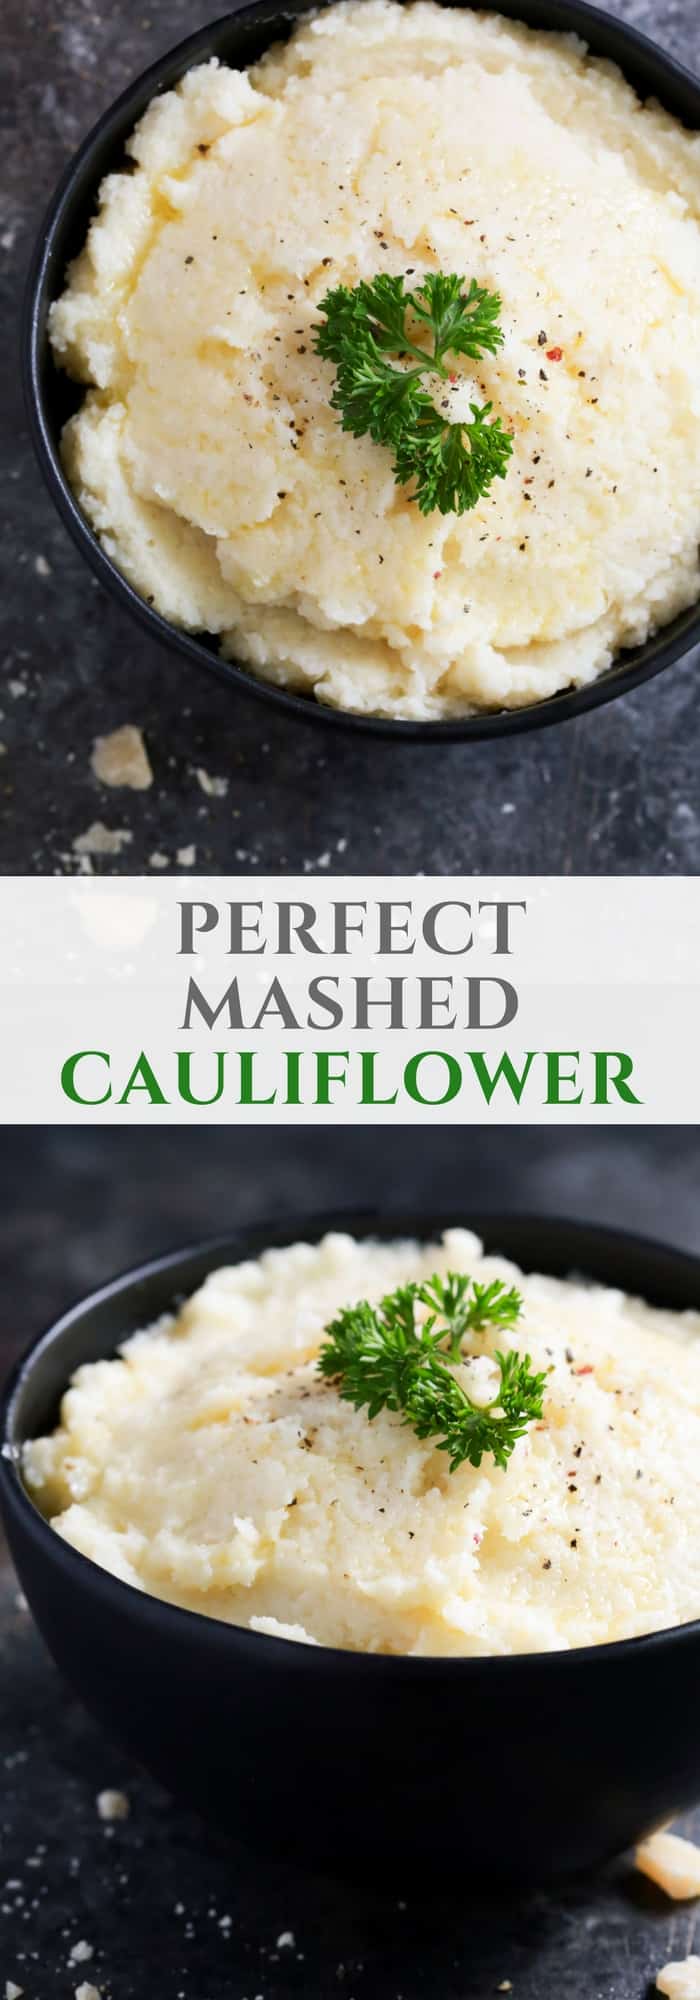  Tired of making watery mashed cauliflower? Try to make my perfect mashed cauliflower recipe using an immersion blender and season with garlic powder, Parmesan cheese, mayo and butter. Mm… Amazing! It has a perfect smooth texture that you and your family will love.